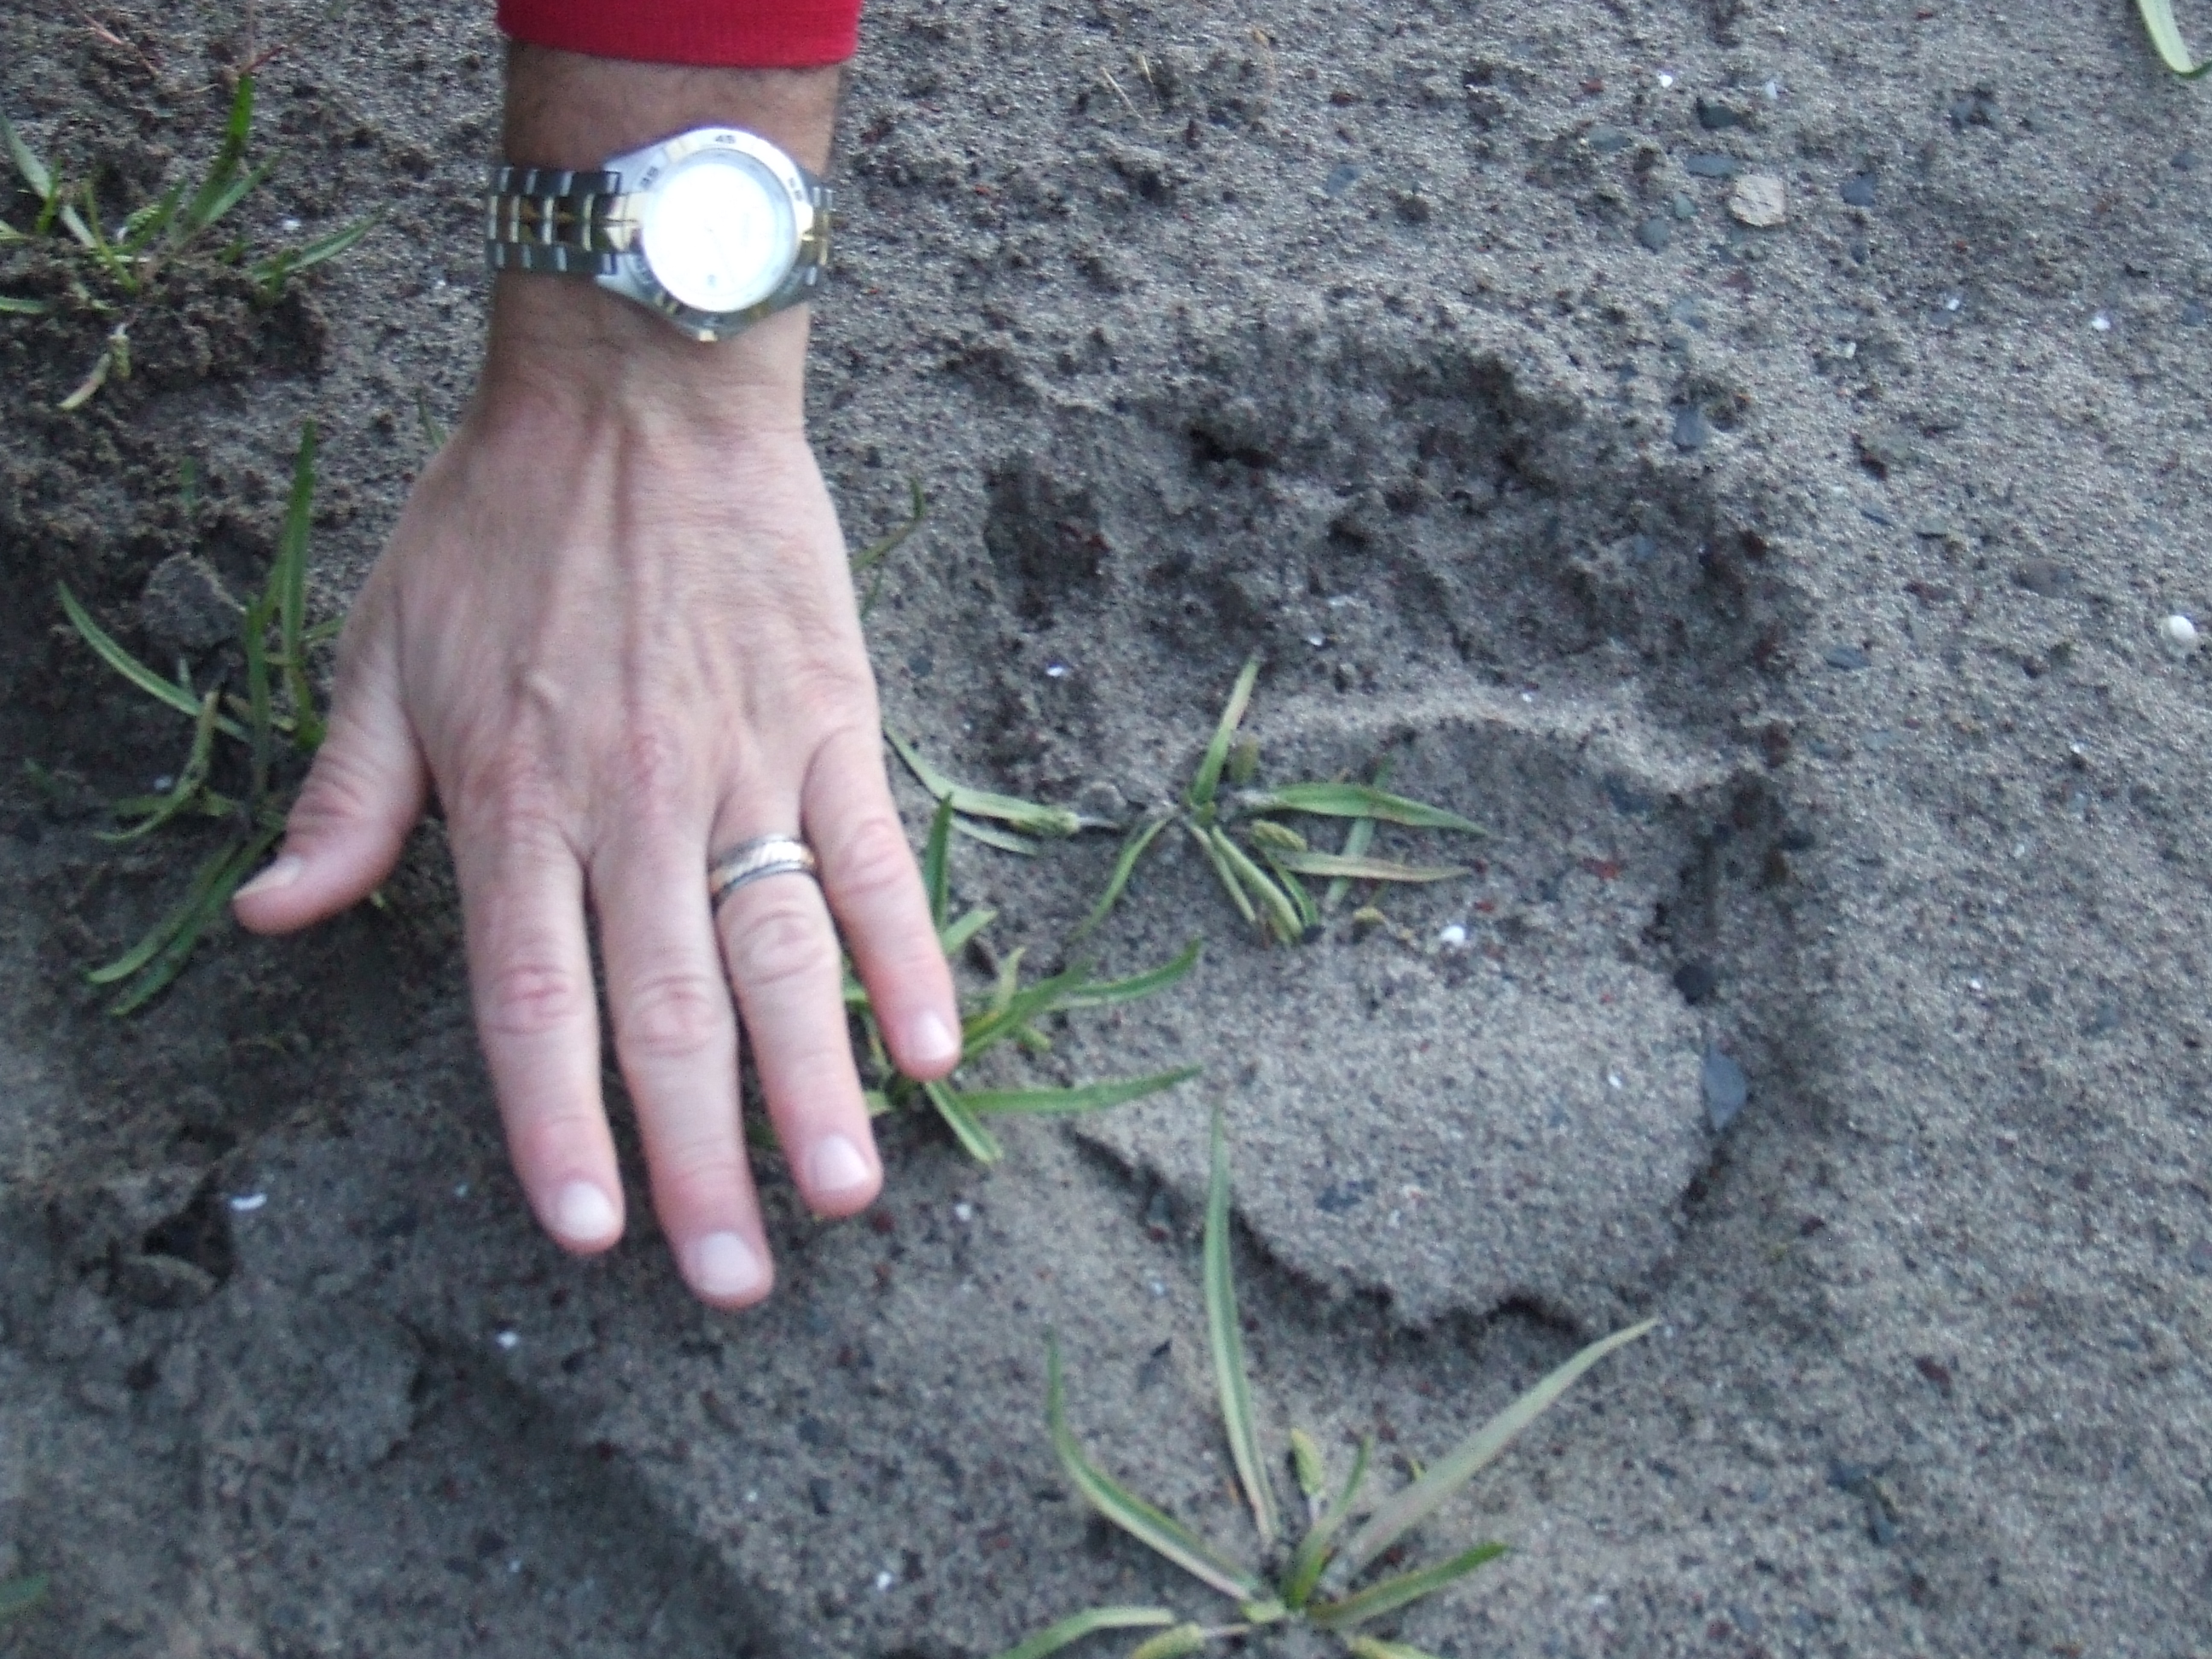 Bear paw print in the sand